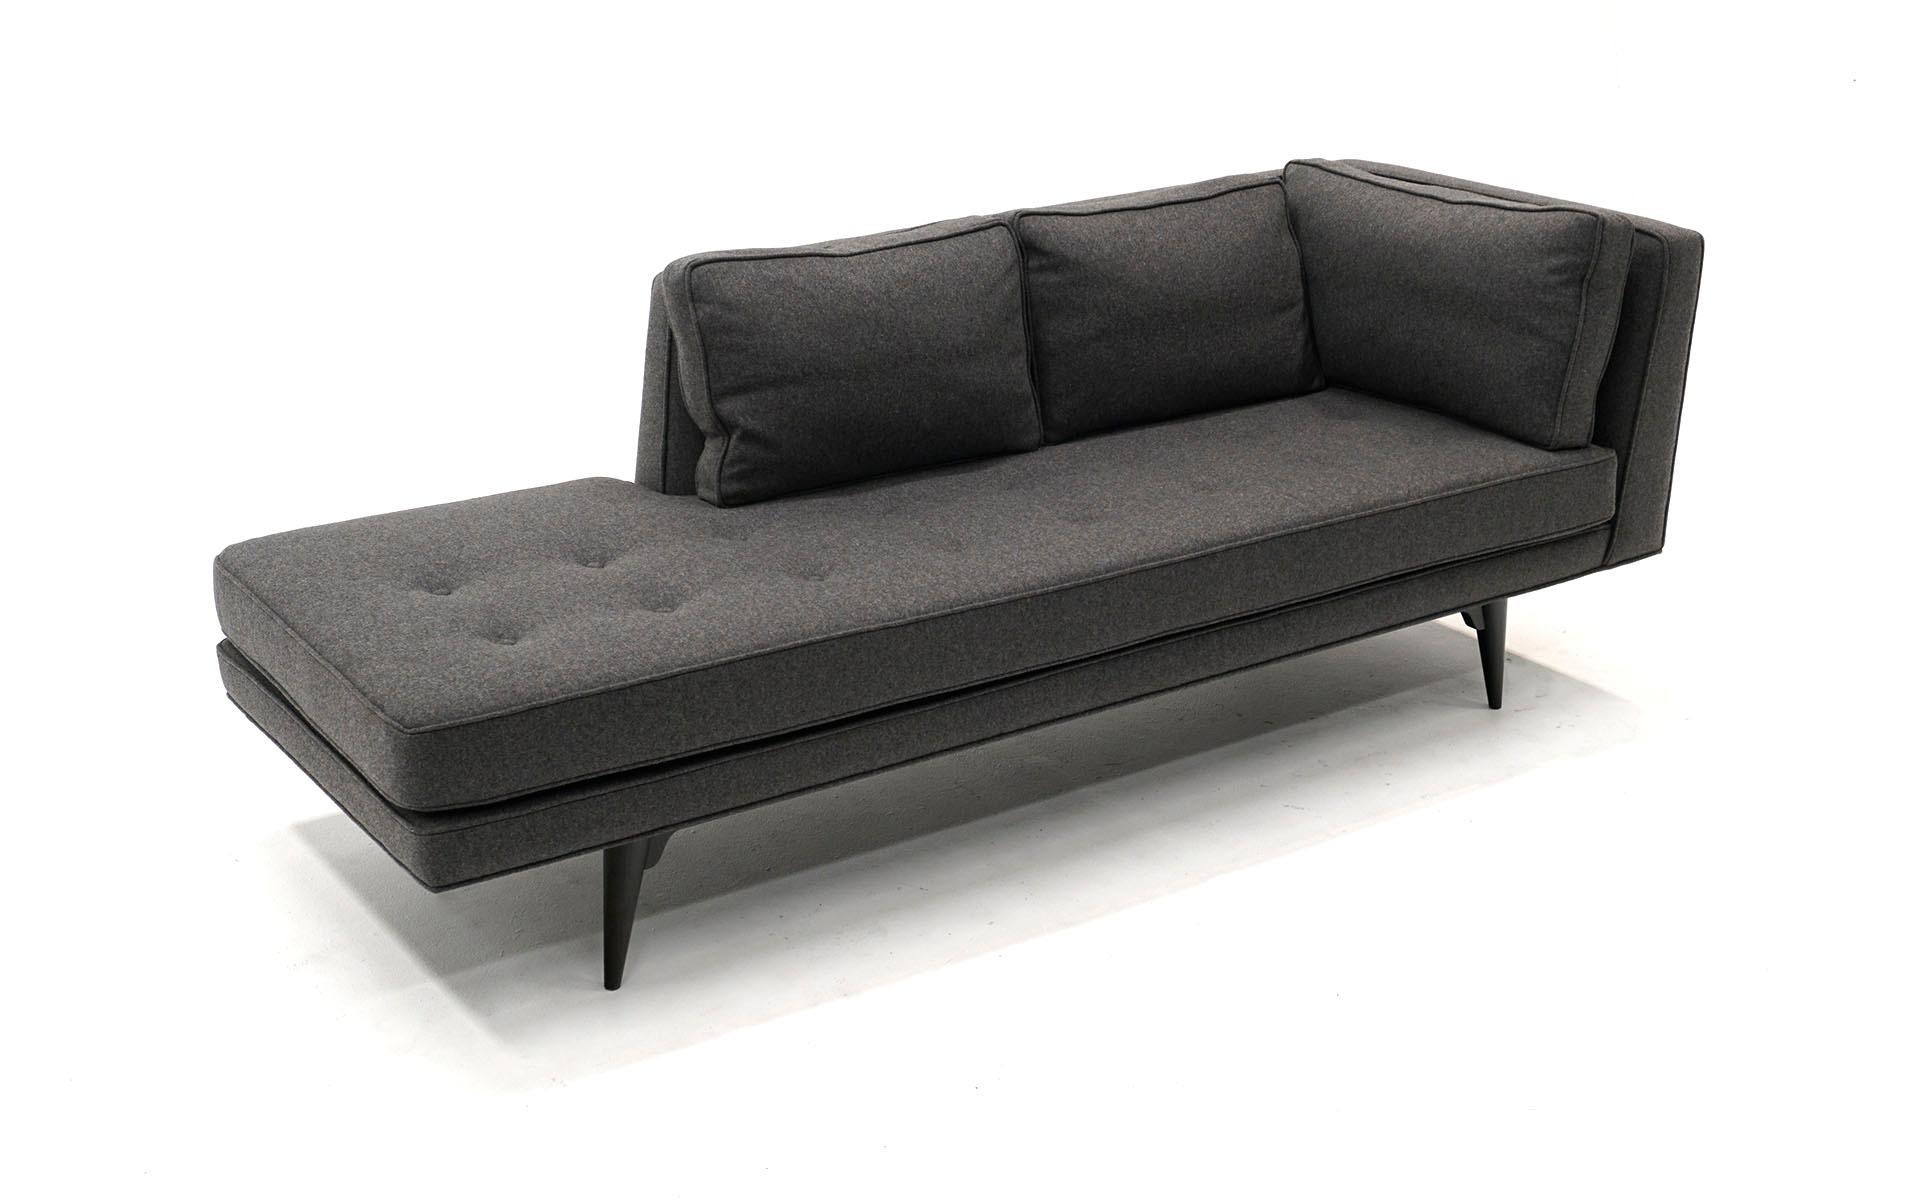 Left arm sofa / chaise longues / lounge designed by Edward Wormley for Dunbar, 1950s. Expertly restored and upholstered in a charcoal fabric with ebonized mahogany frame.